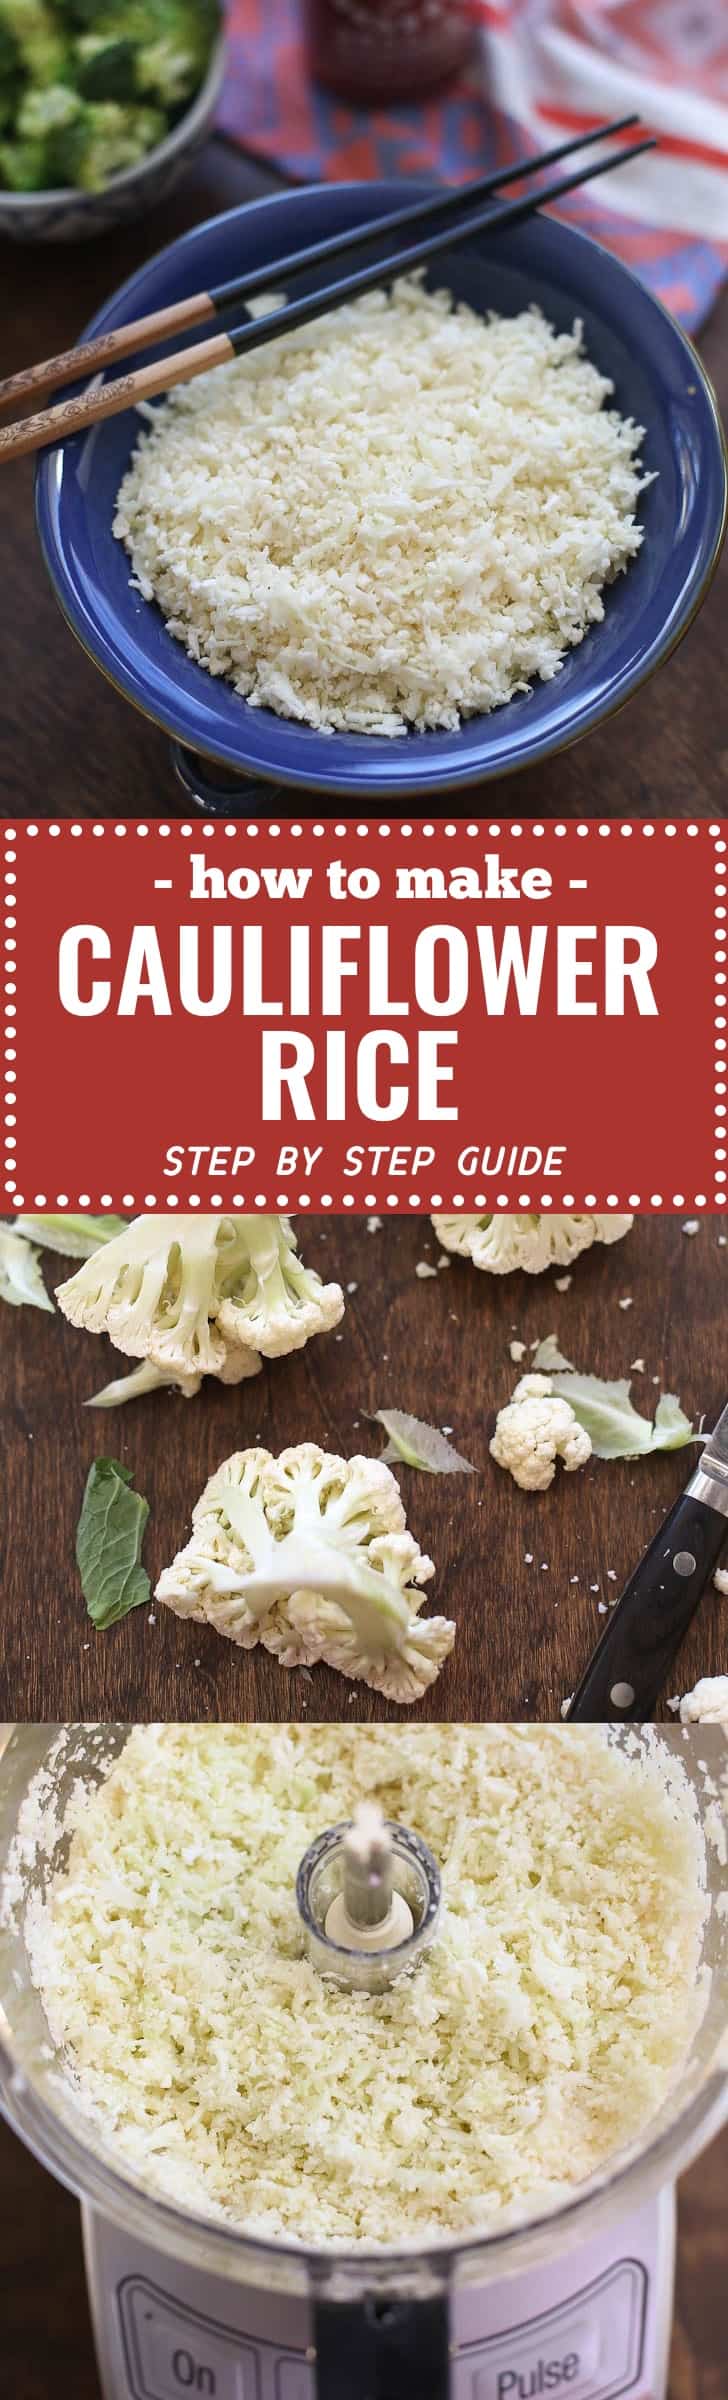 Cauliflower rice is super versatile - a low-carb, gluten-free, paleo and vegan -friendly substitute for rice that is also totally delicious. This is a step by step guide how to make cauliflower rice at home with pictures and instructions on how to freeze. We serve it with stir-frys, turn it into fried rice, and keep it in the freezer as a quick, healthy side dish.